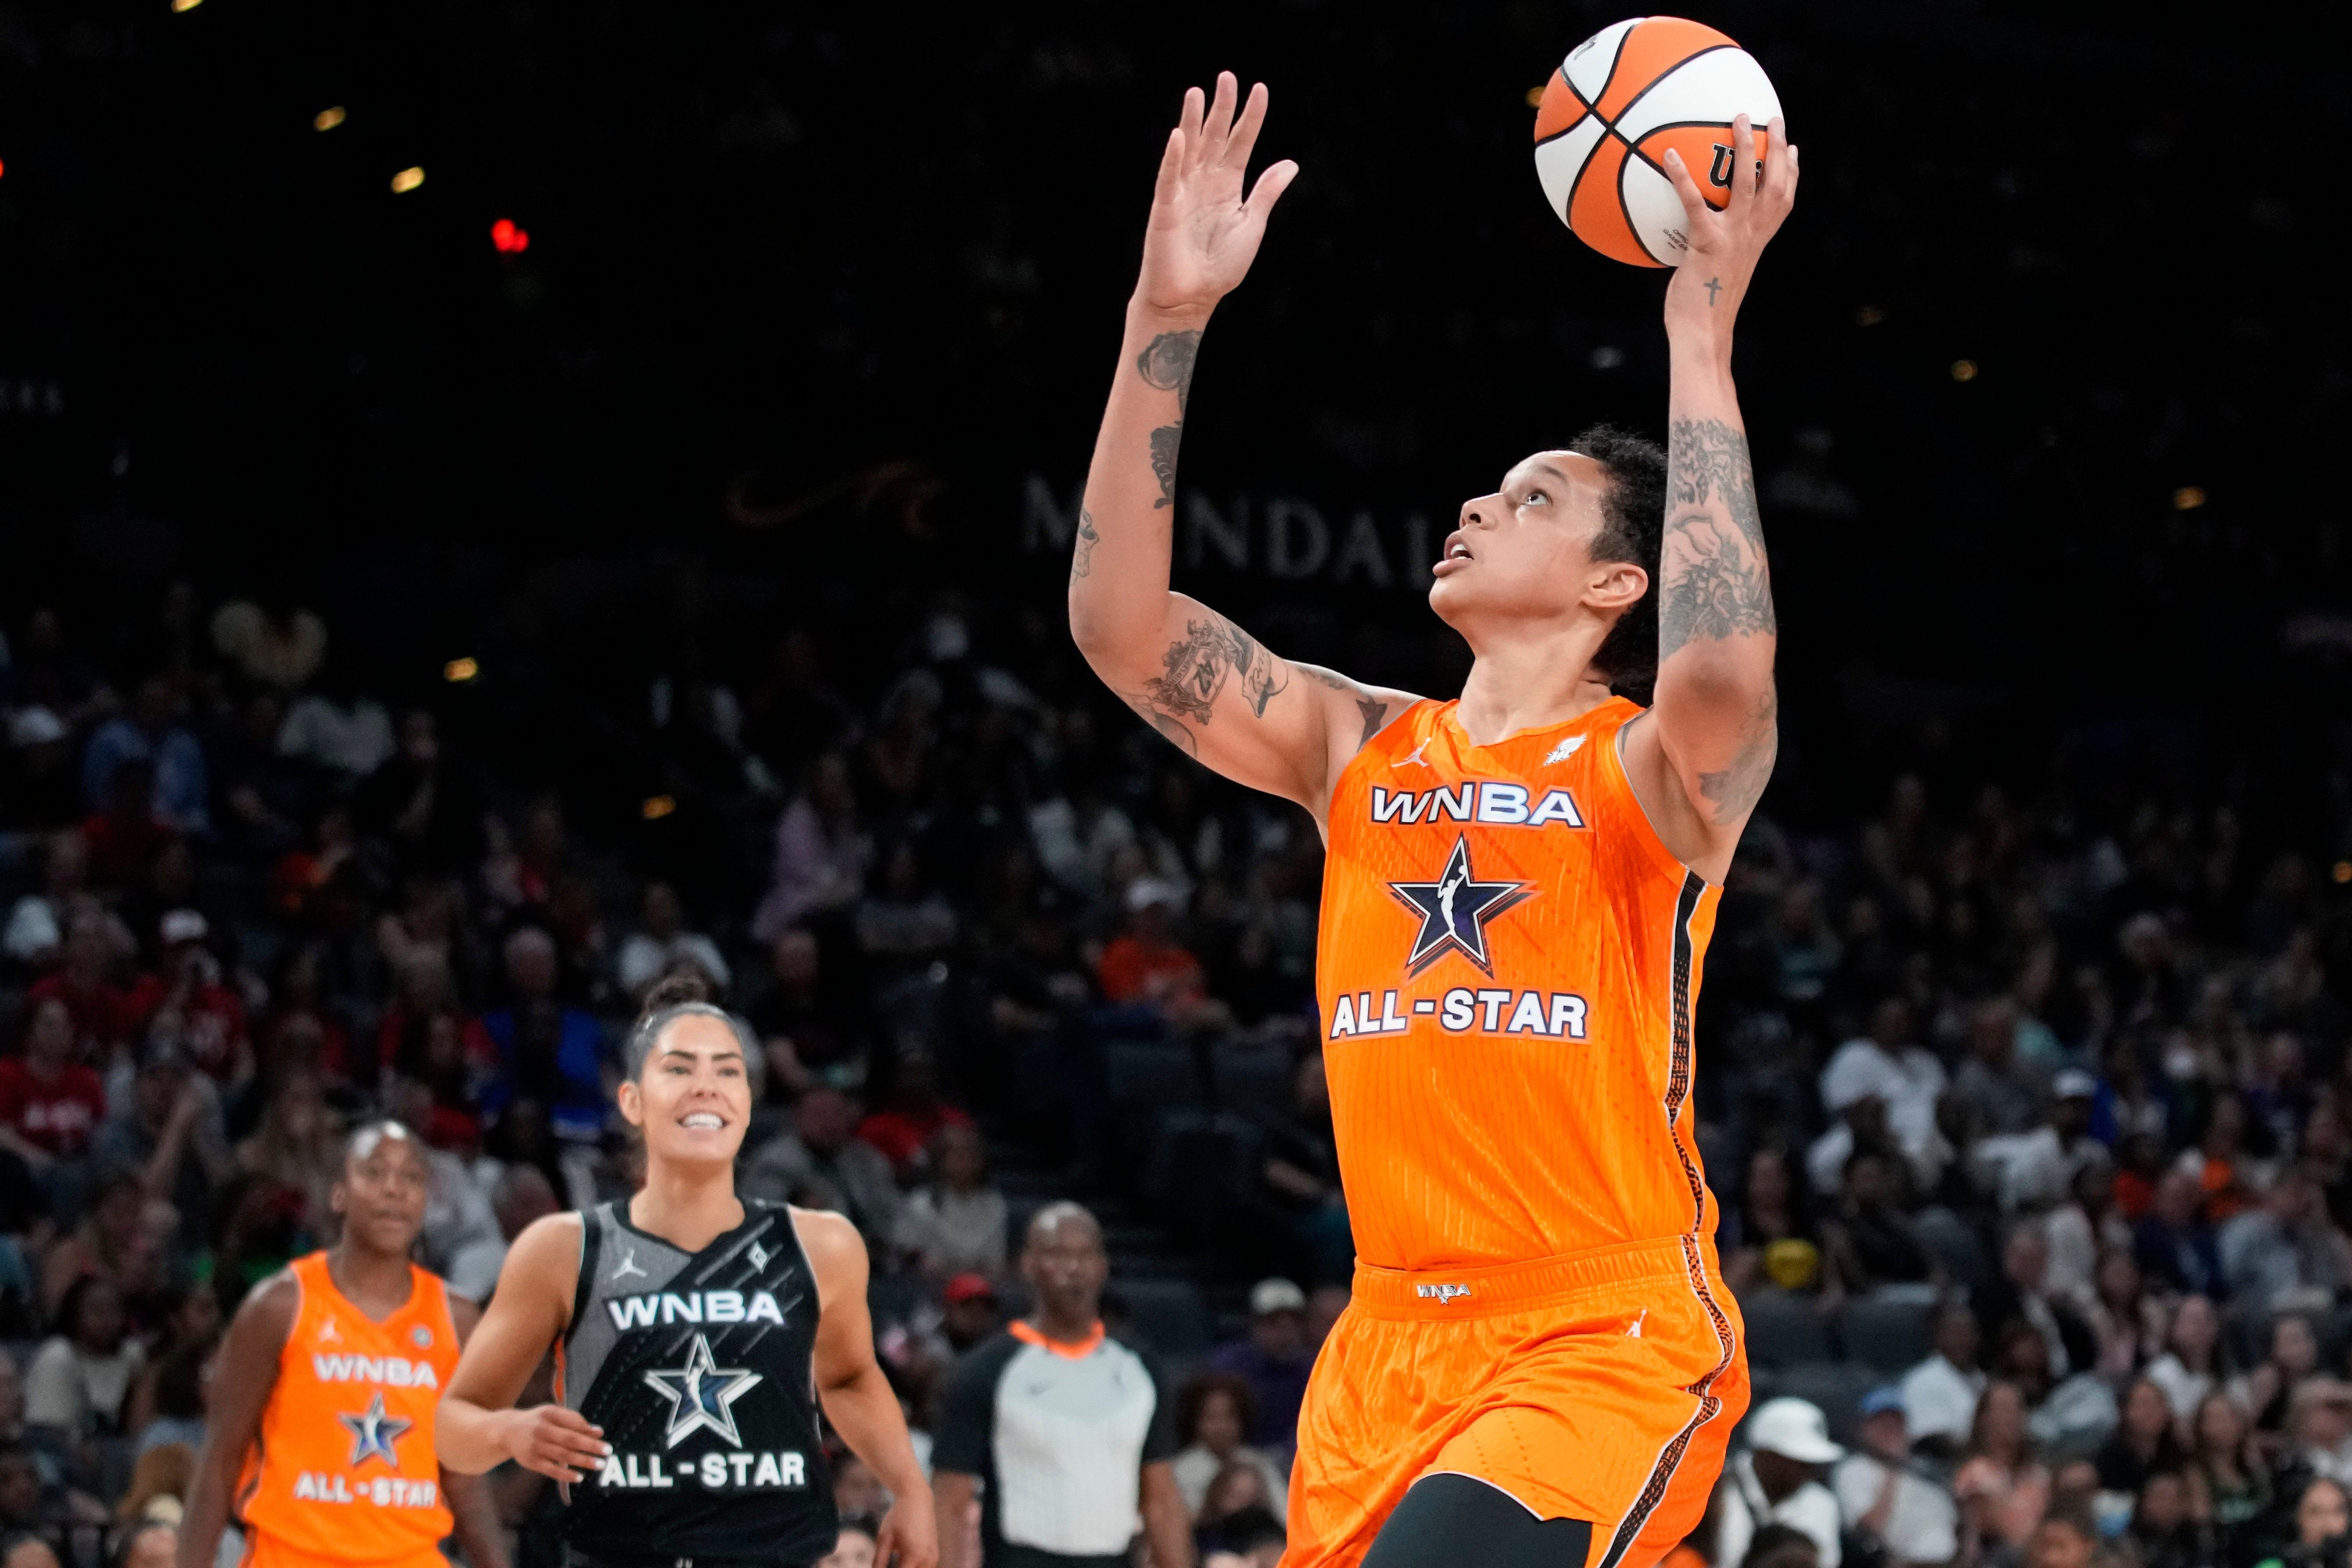 Brittney Griner during the WNBA All-Star Game